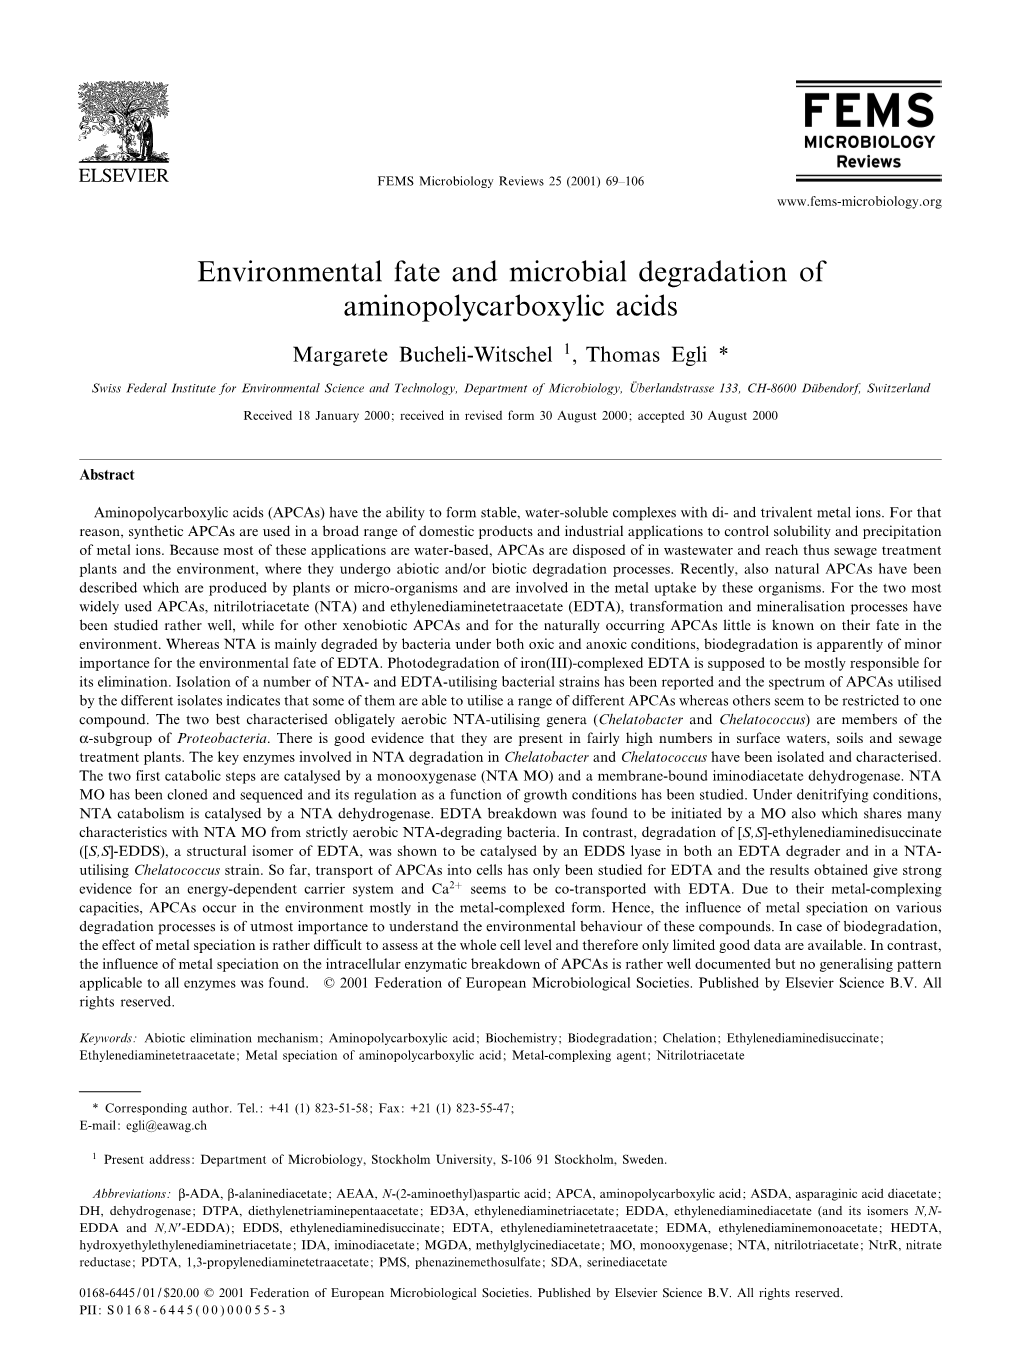 Environmental Fate and Microbial Degradation of Aminopolycarboxylic Acids